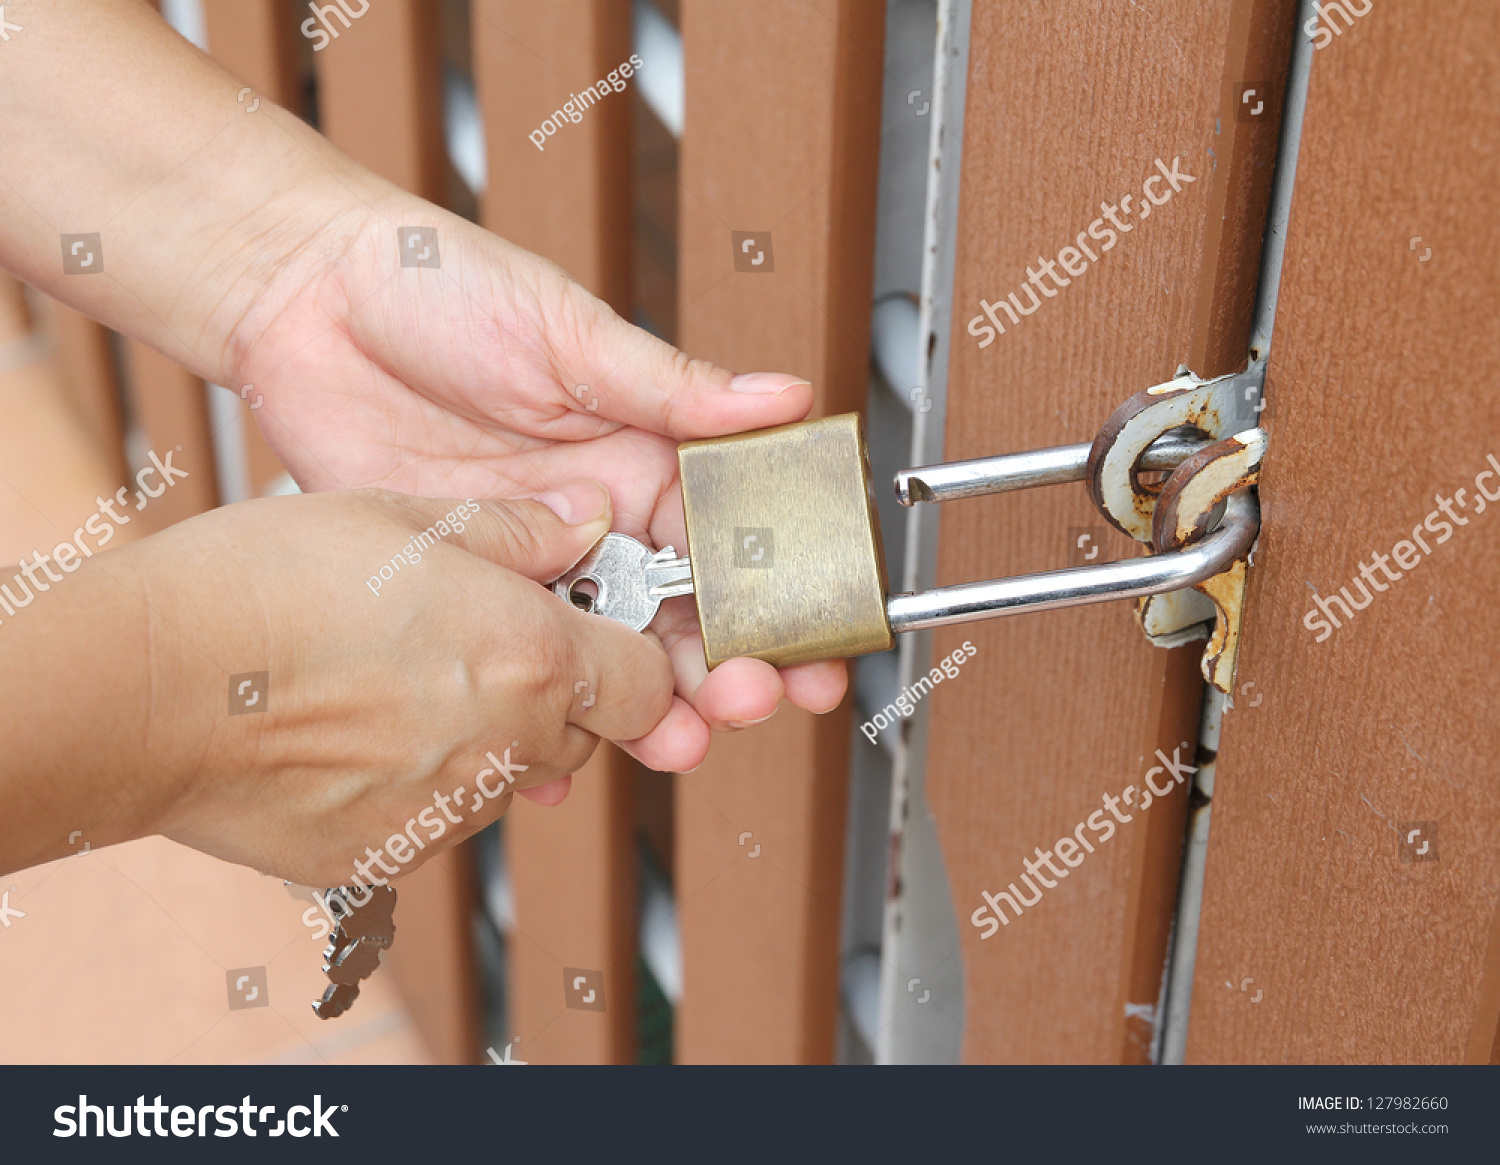 Closeup image of hand use key to open padlock and the brown wooden door #127982660